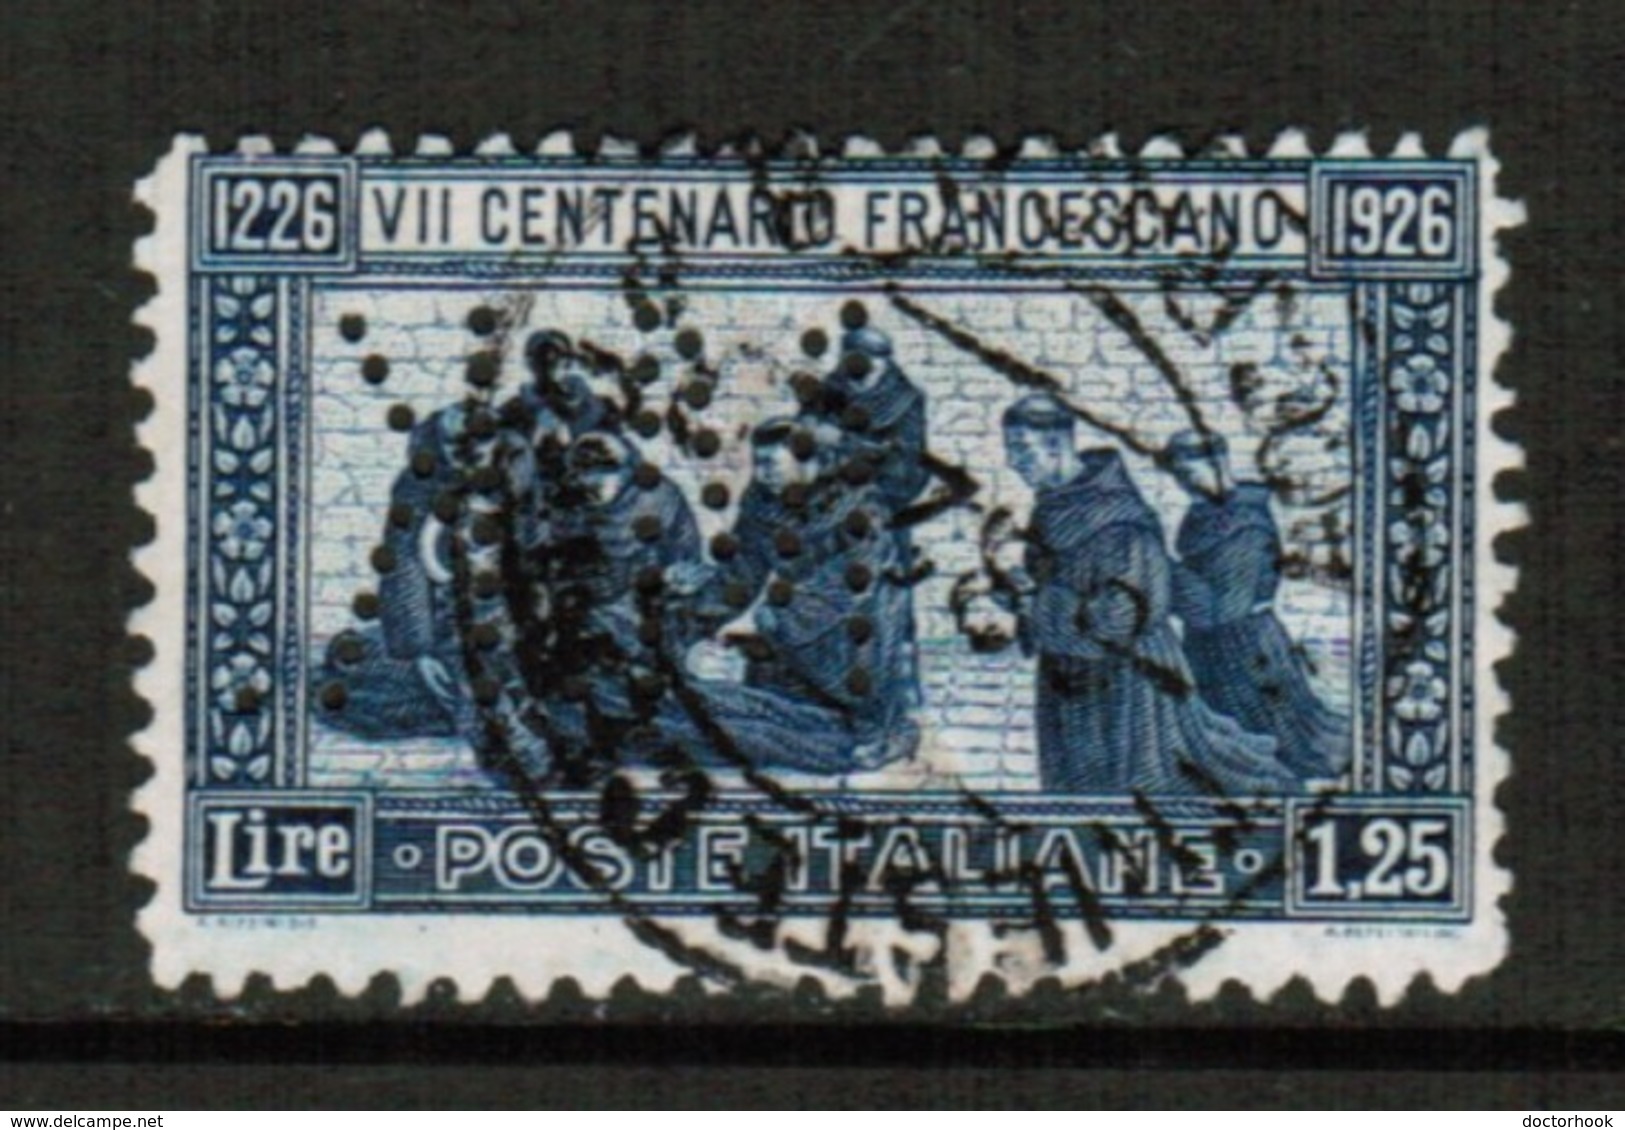 ITALY  Scott # 182 F-VF USED PERFIN  (Stamp Scan # 516) - Used